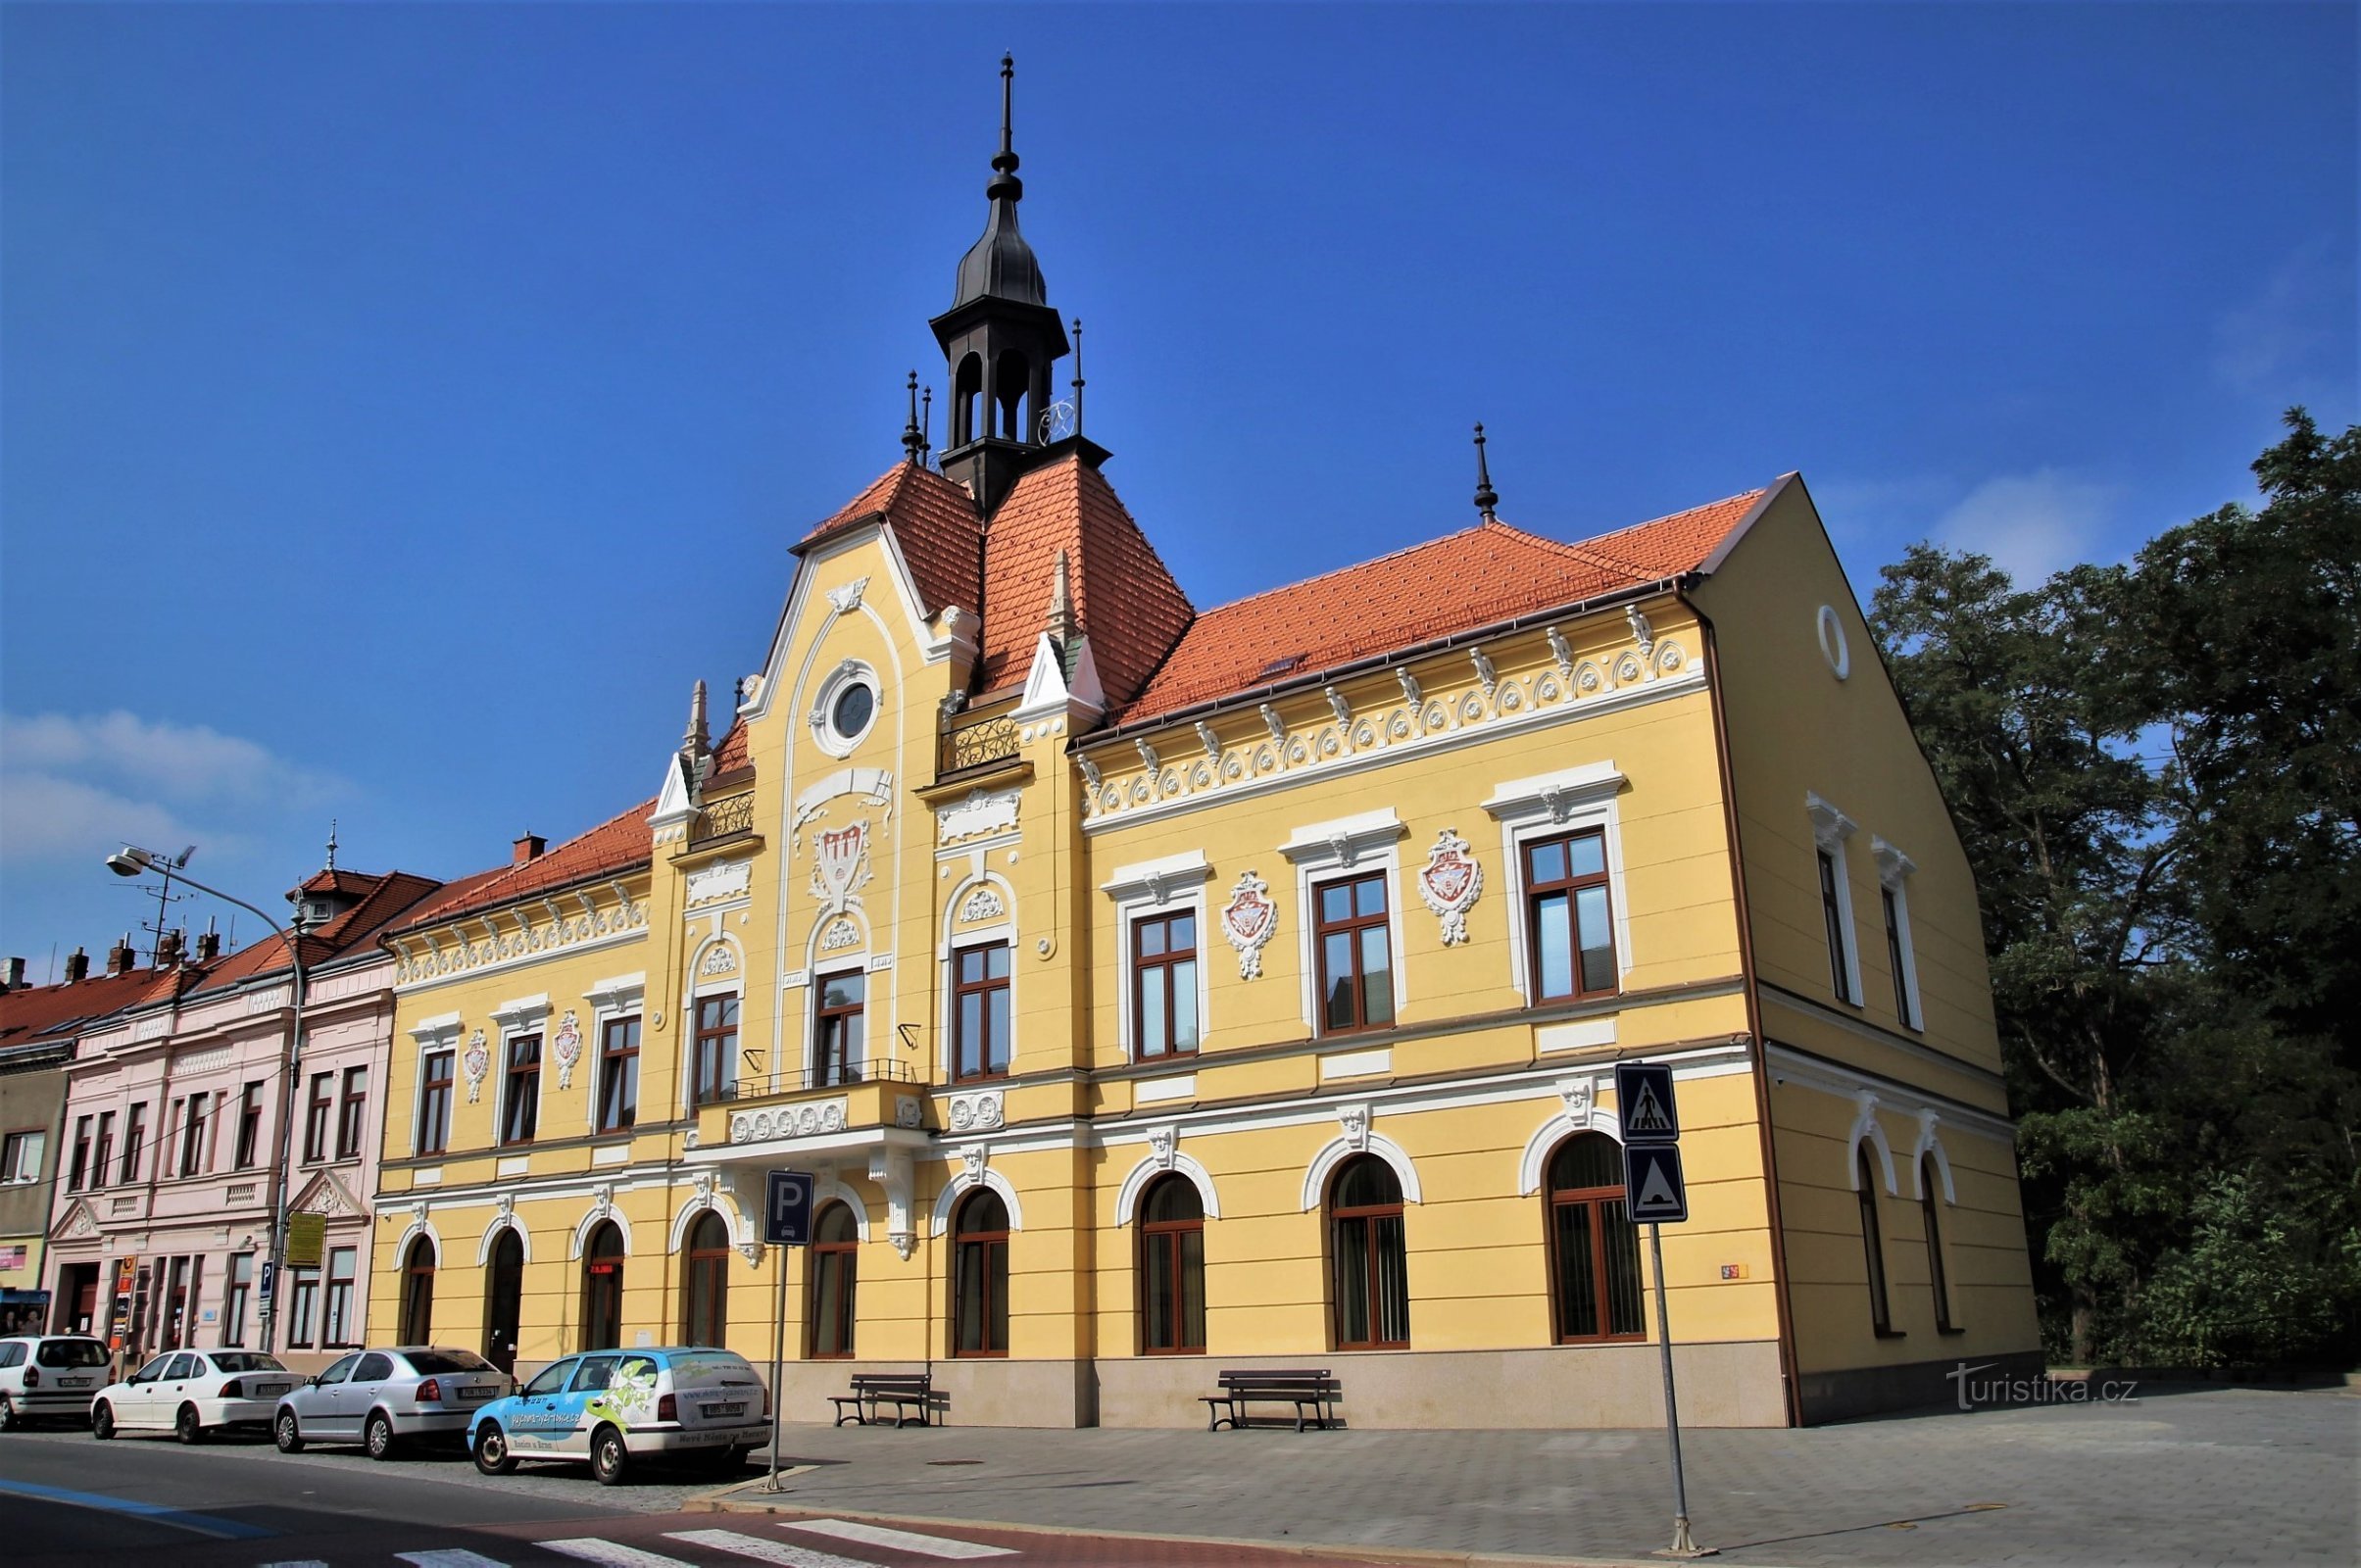 Pohořelice - Cultural and information center